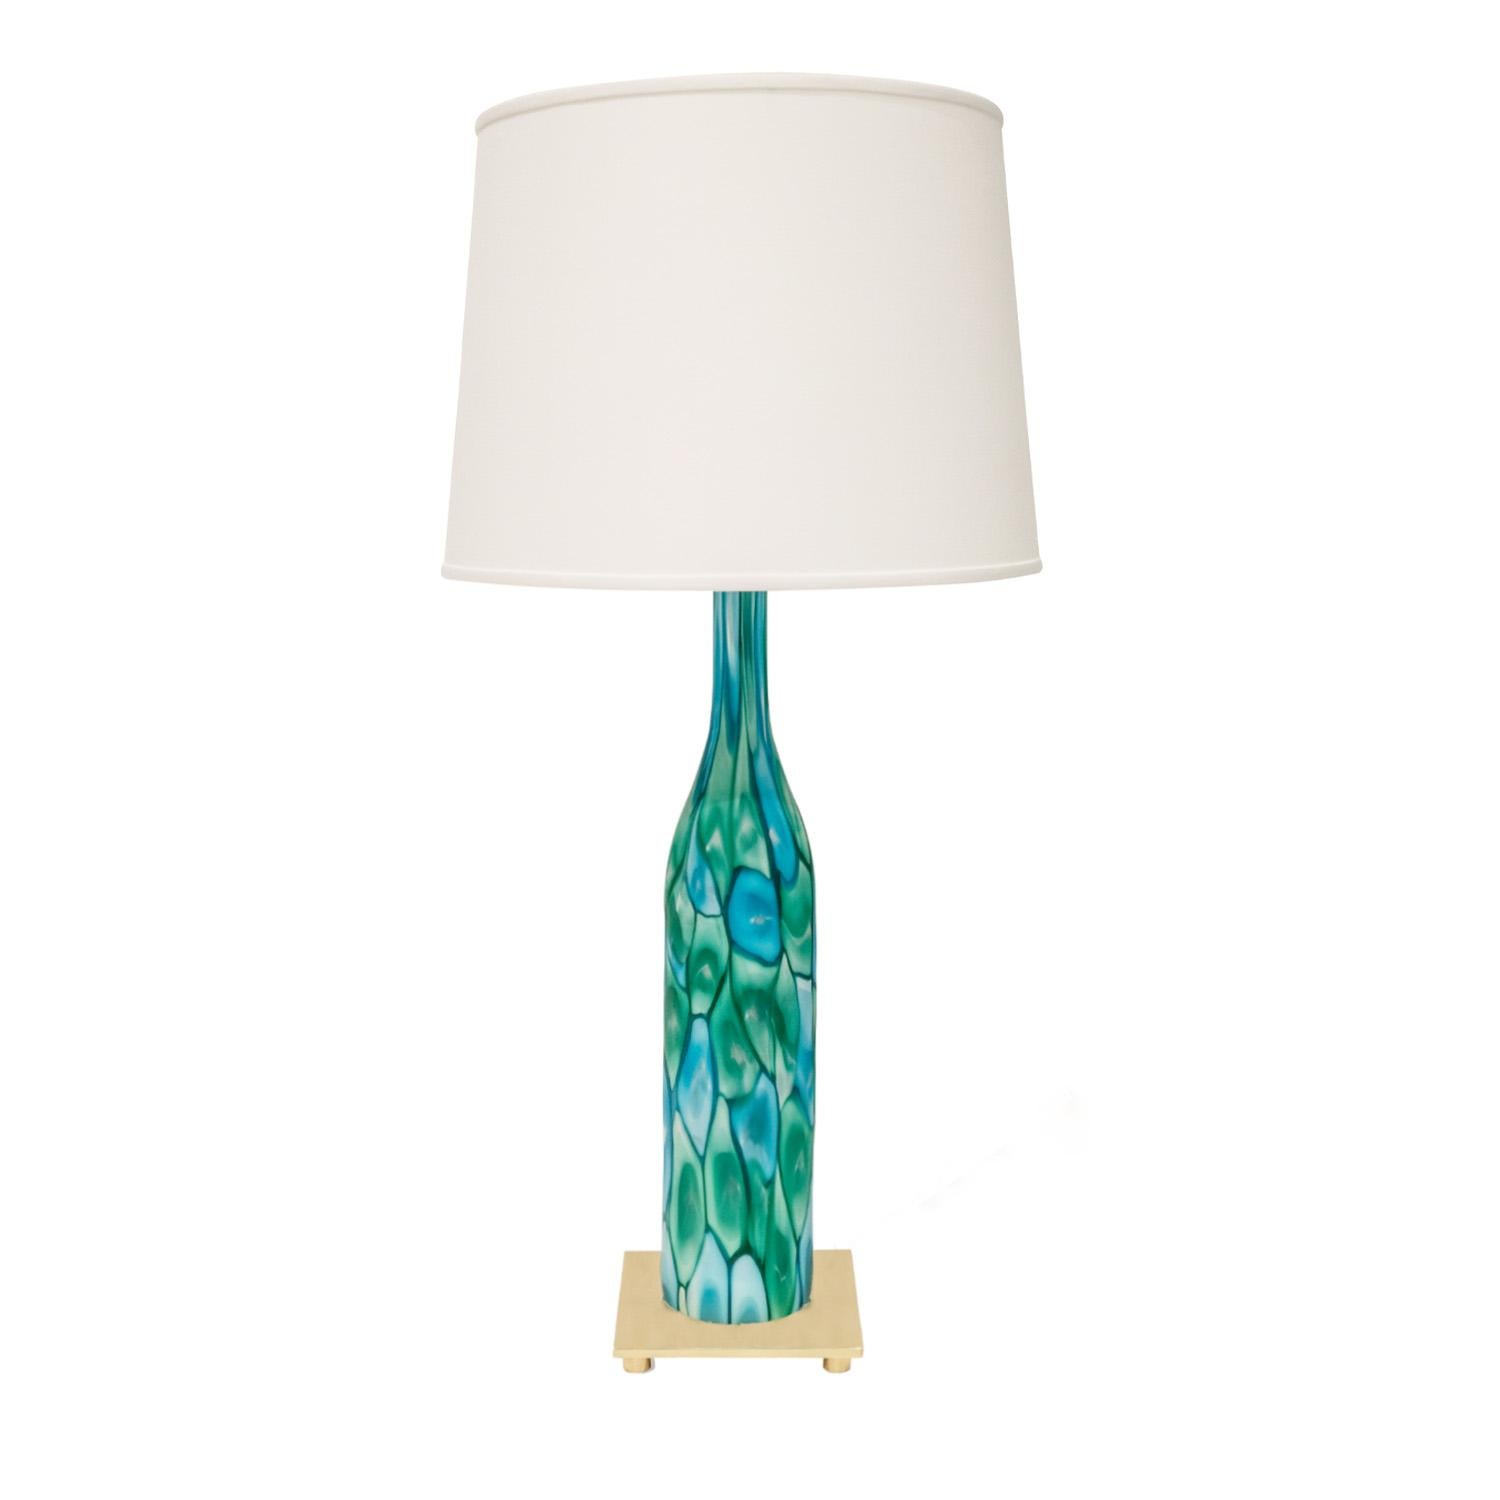 Stunning hand blown glass table lamp with green and blue murrhines by Ermanno Toso for Fratelli Toso, Murano Italy, 1959. New polished brass base and 3 socket assembly customized by Lobel Modern. Rewired with silk cord.

Reference:
Venetian Glass